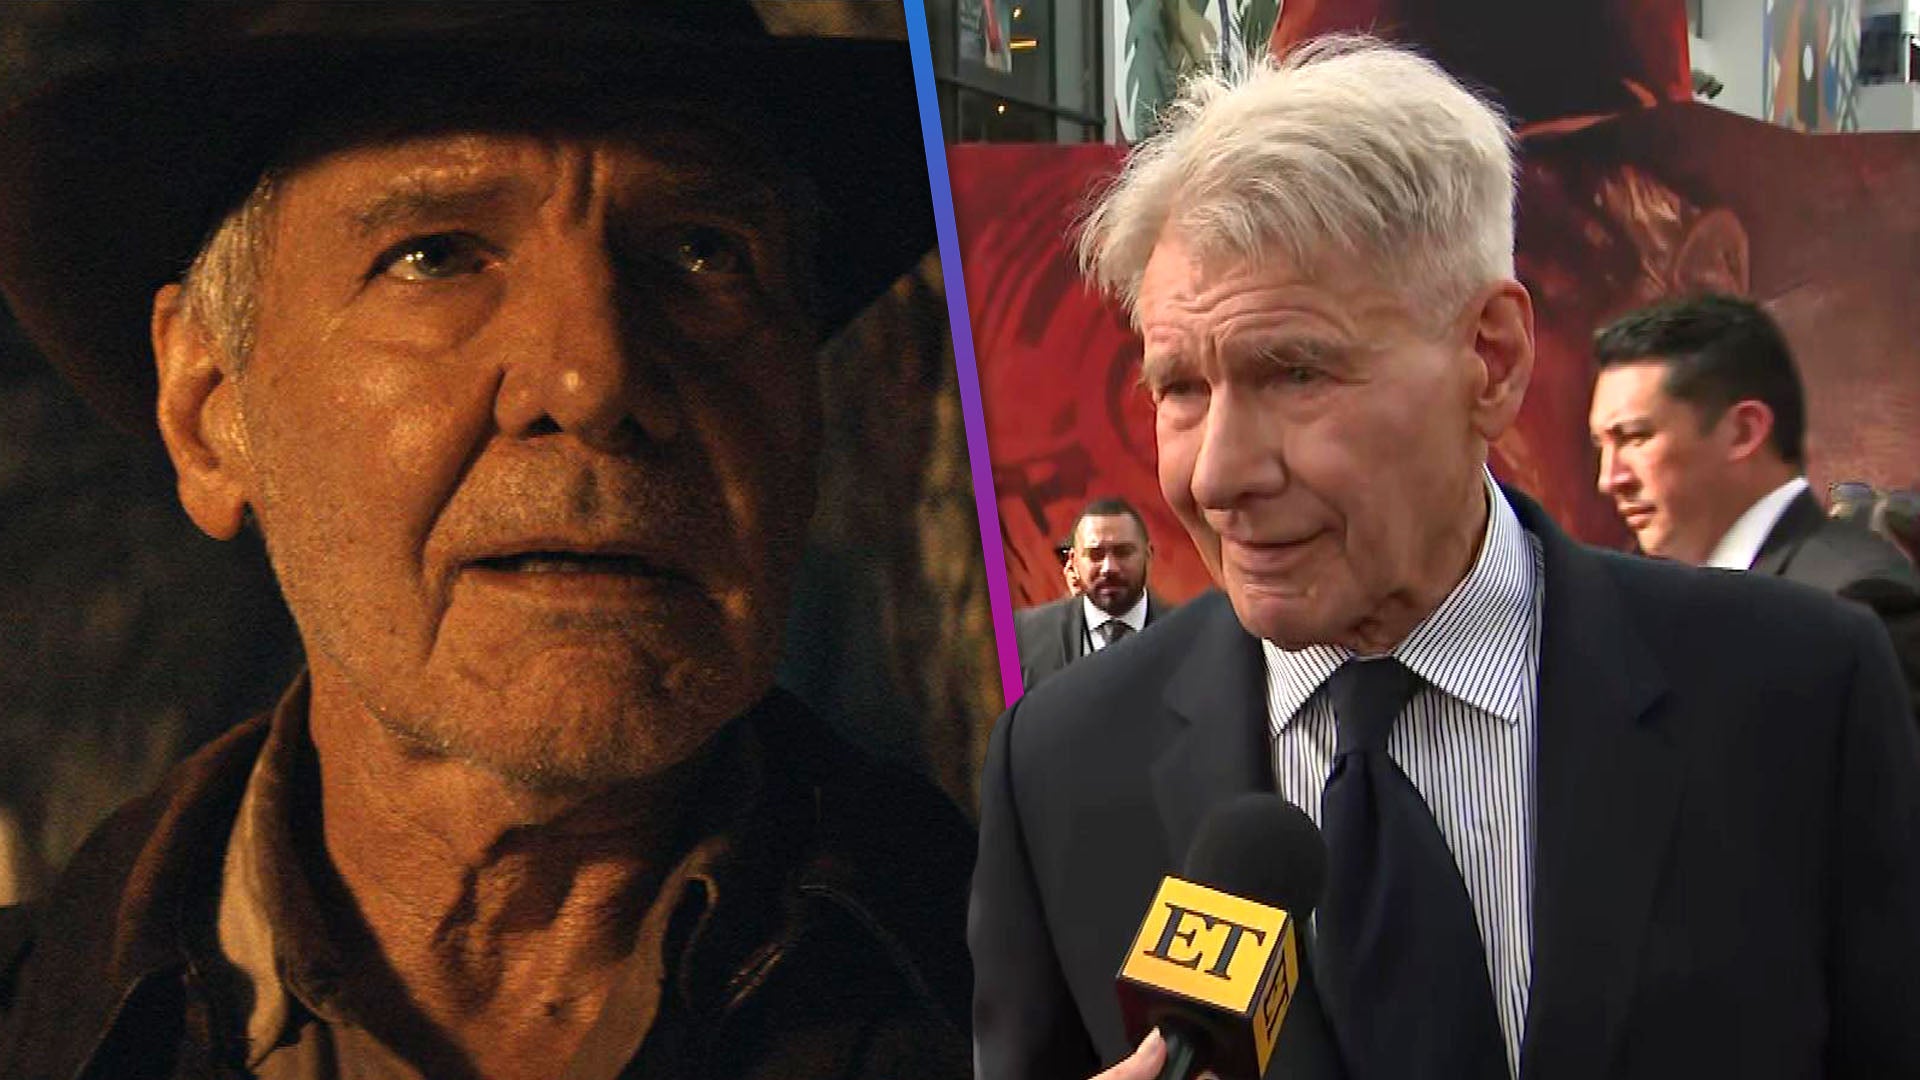 Harrison Ford to play Indiana Jones one last time